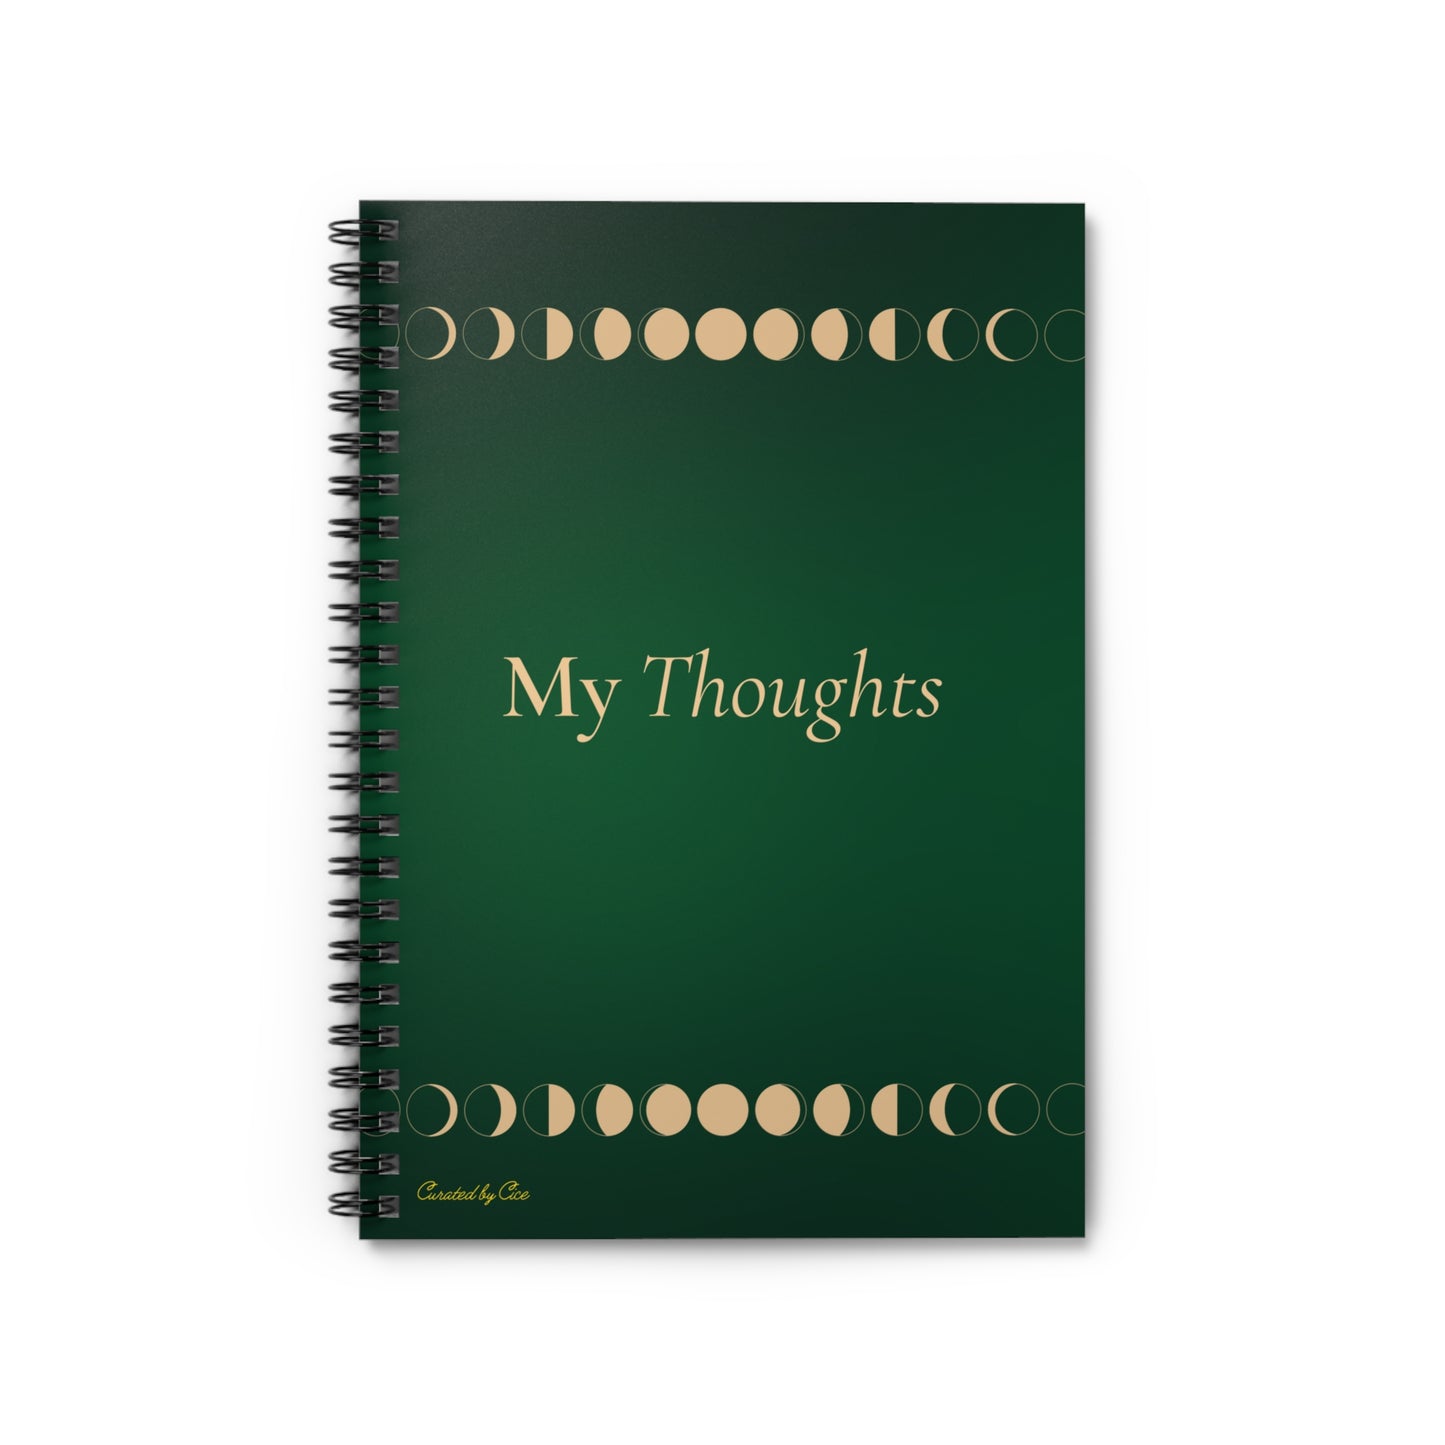 Midnight Thoughts Journal & Notebook